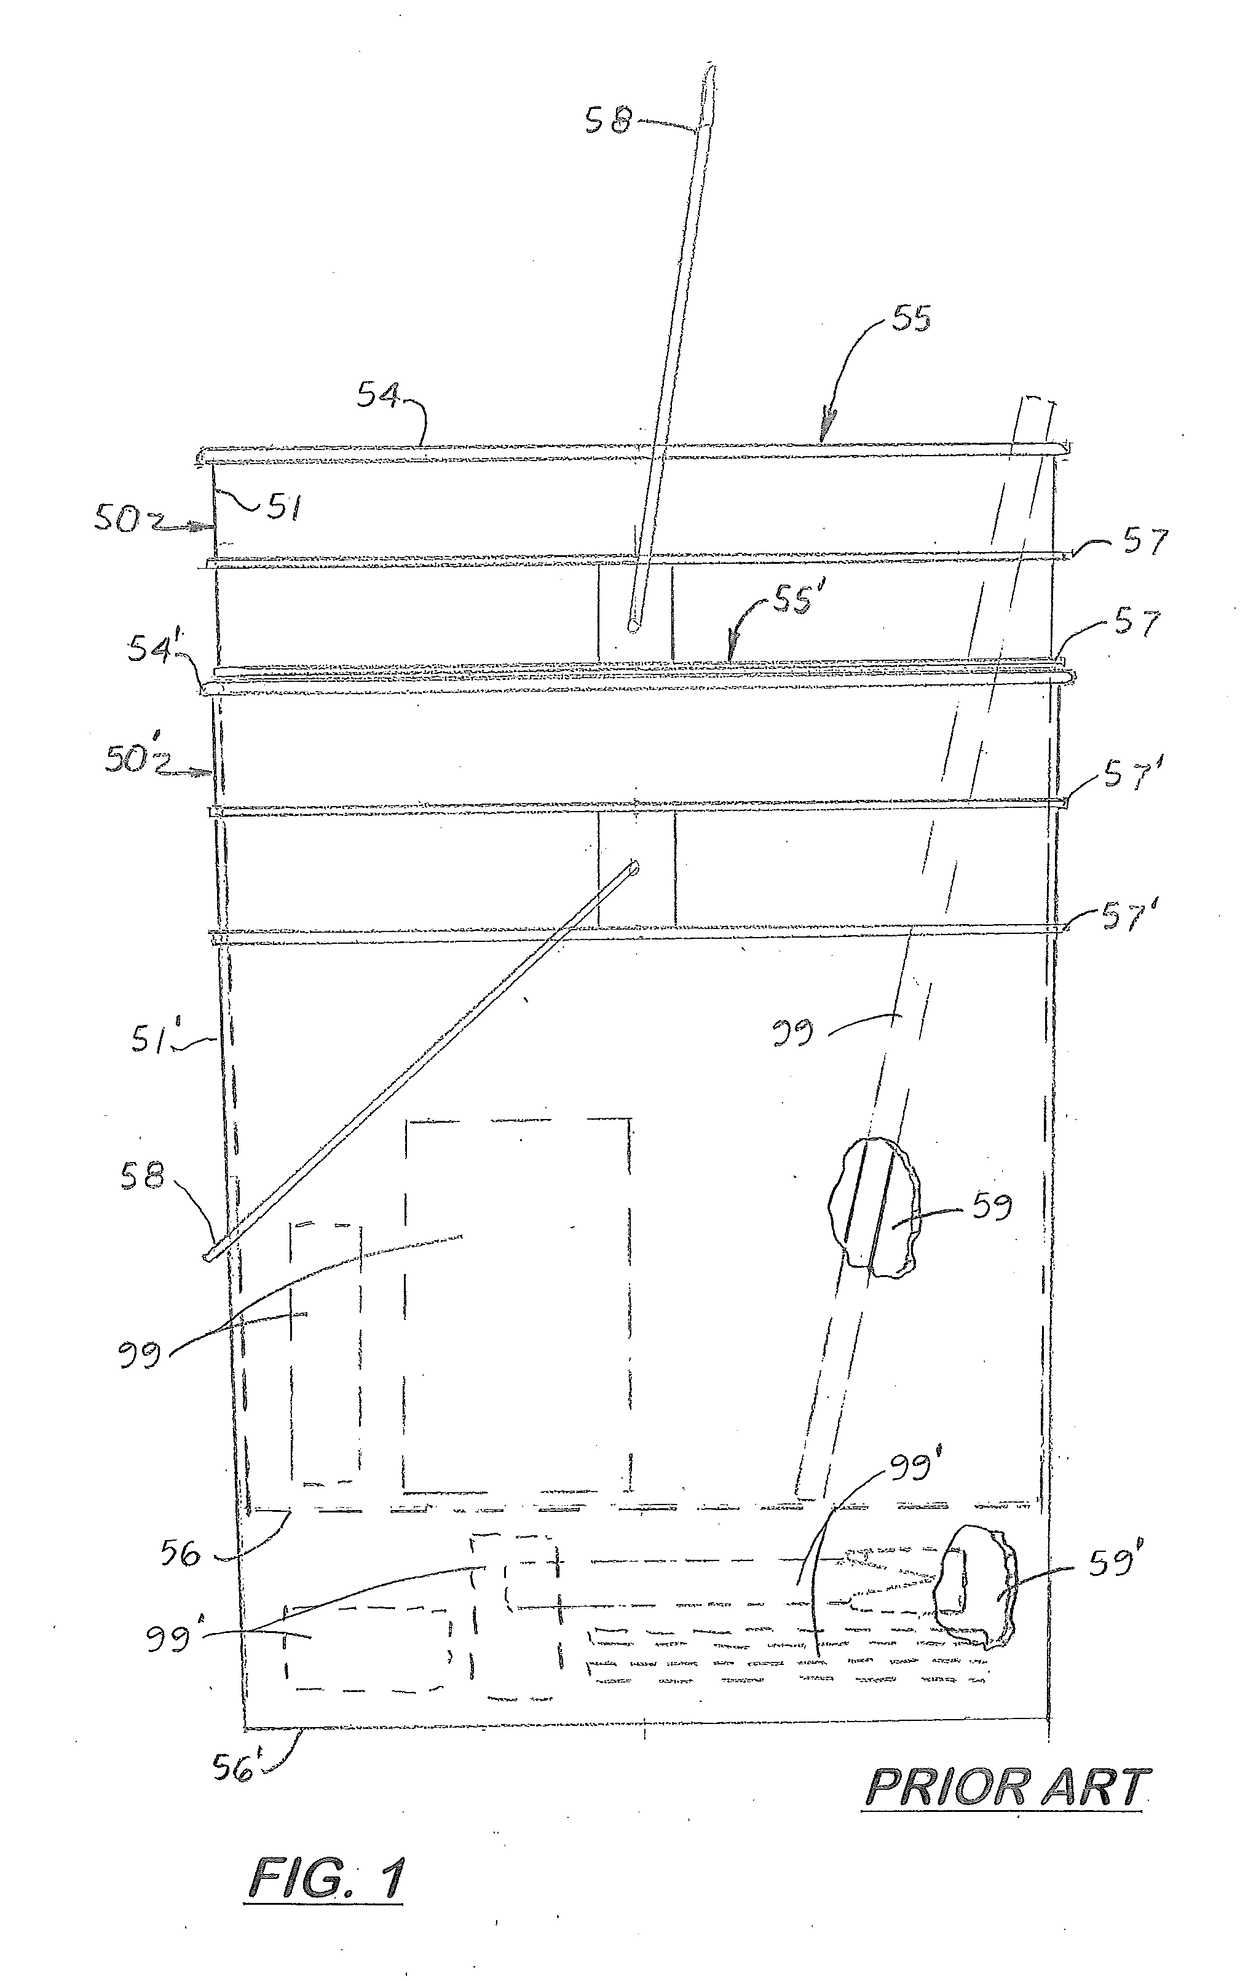 Bucket stack holding apparatus with easy release feature